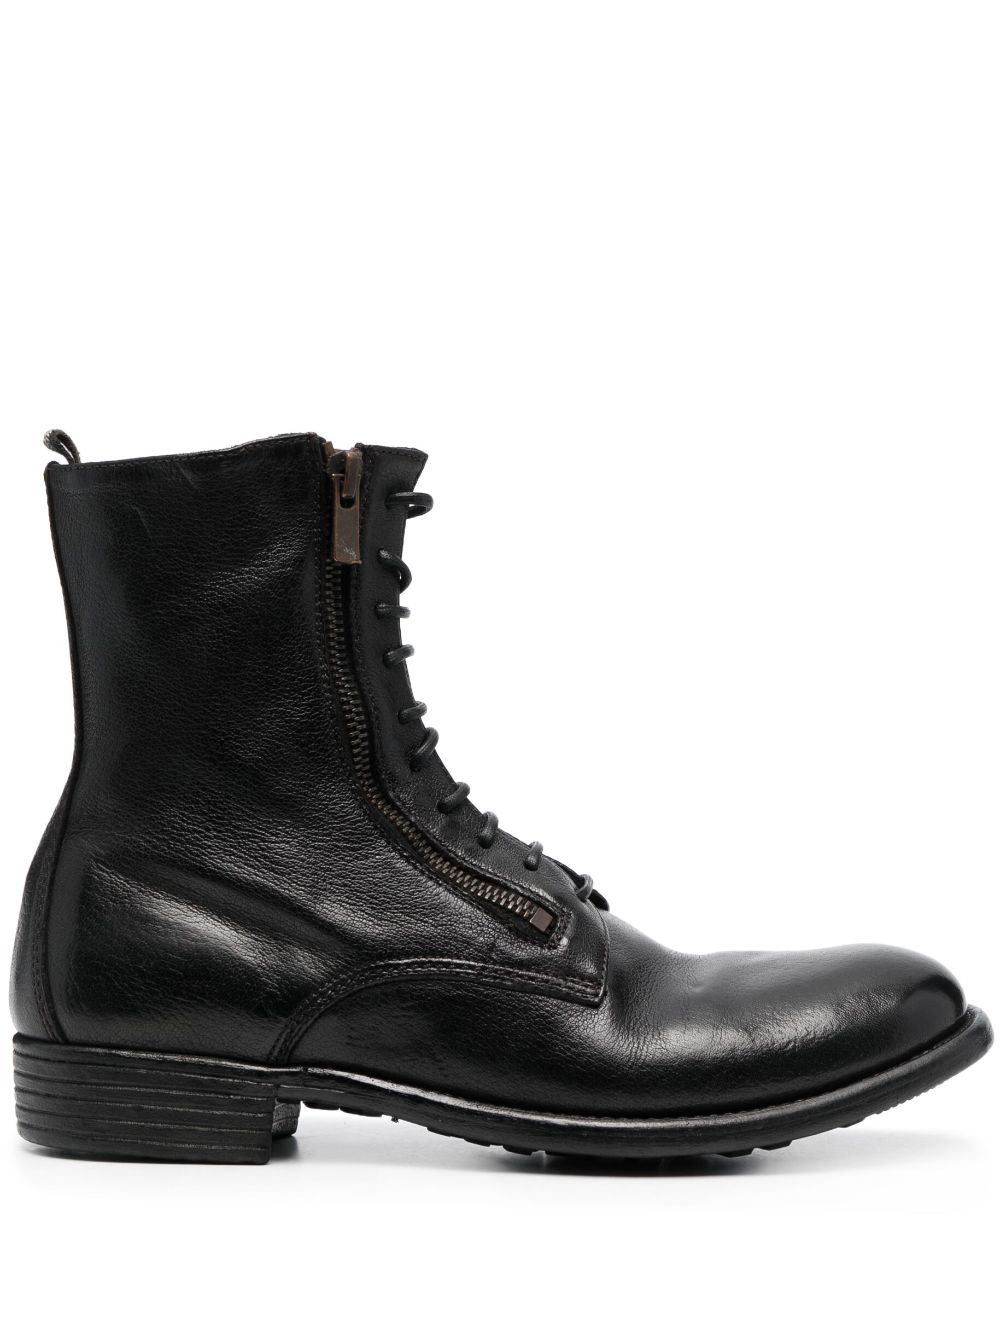 Image 1 of Officine Creative Lexikon 149 leather boots